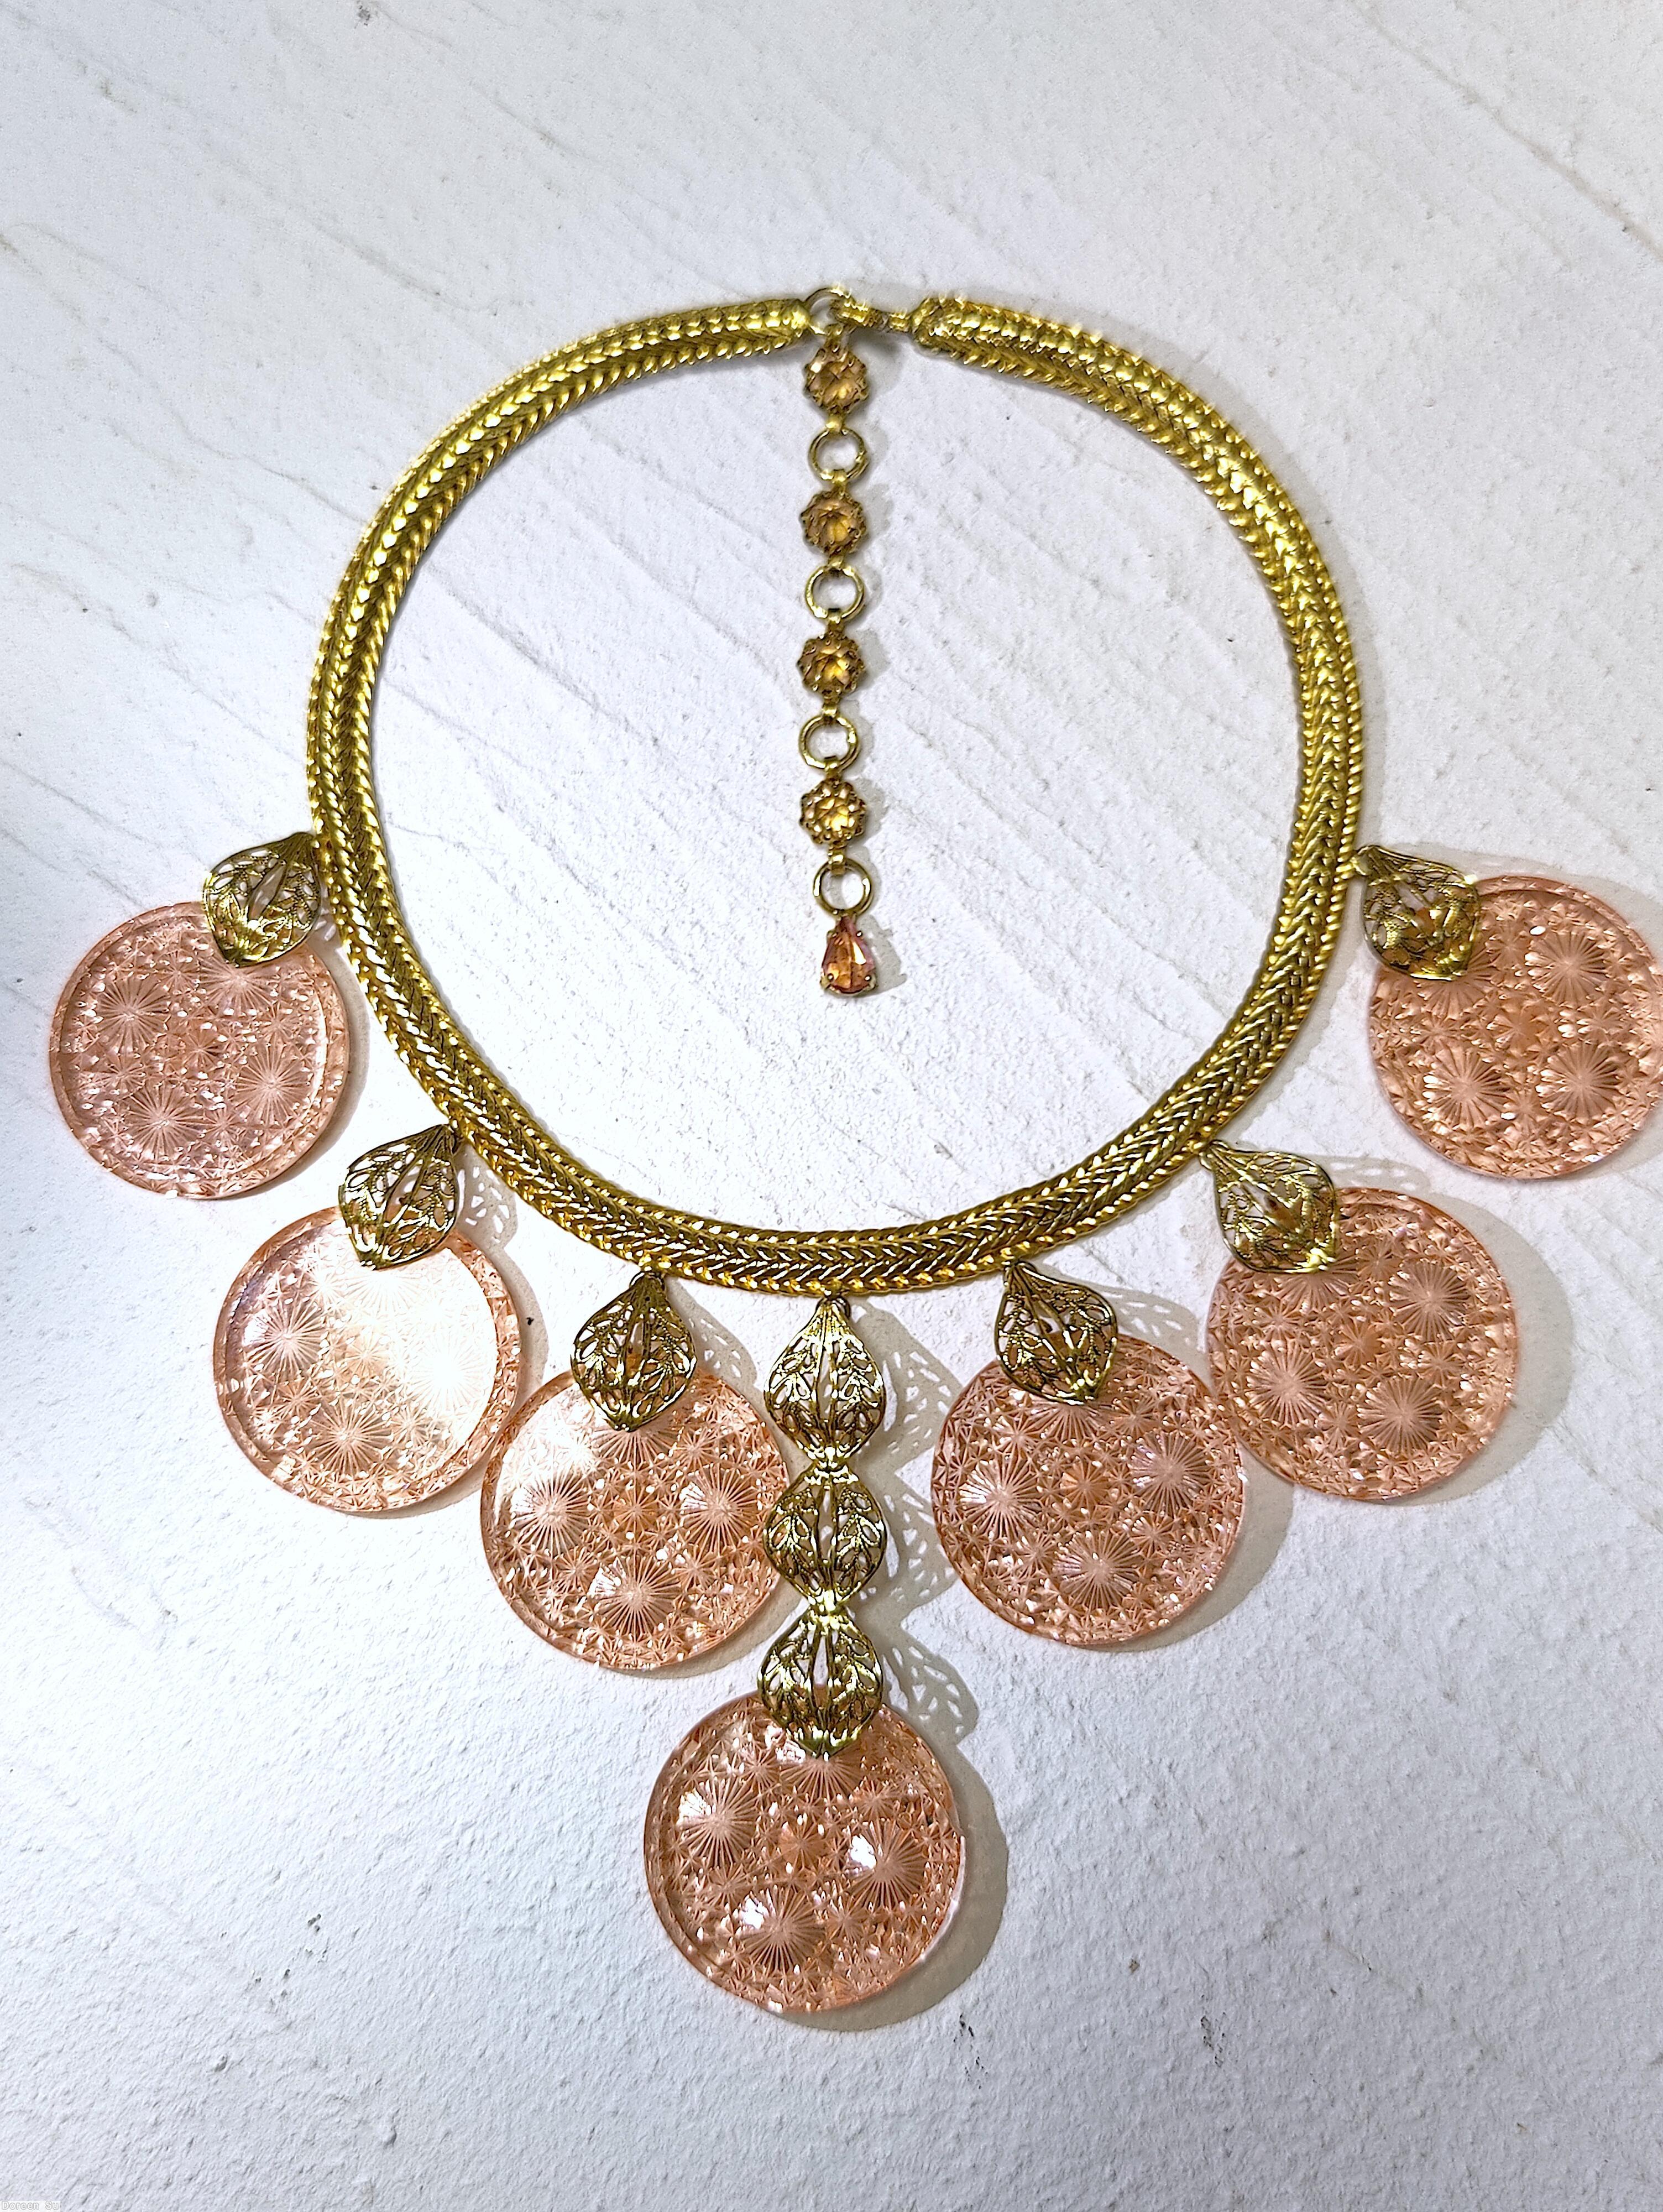 Schreiner single mesh chain 7 large molded disc filigree peach large molded disc goldtone jewelry